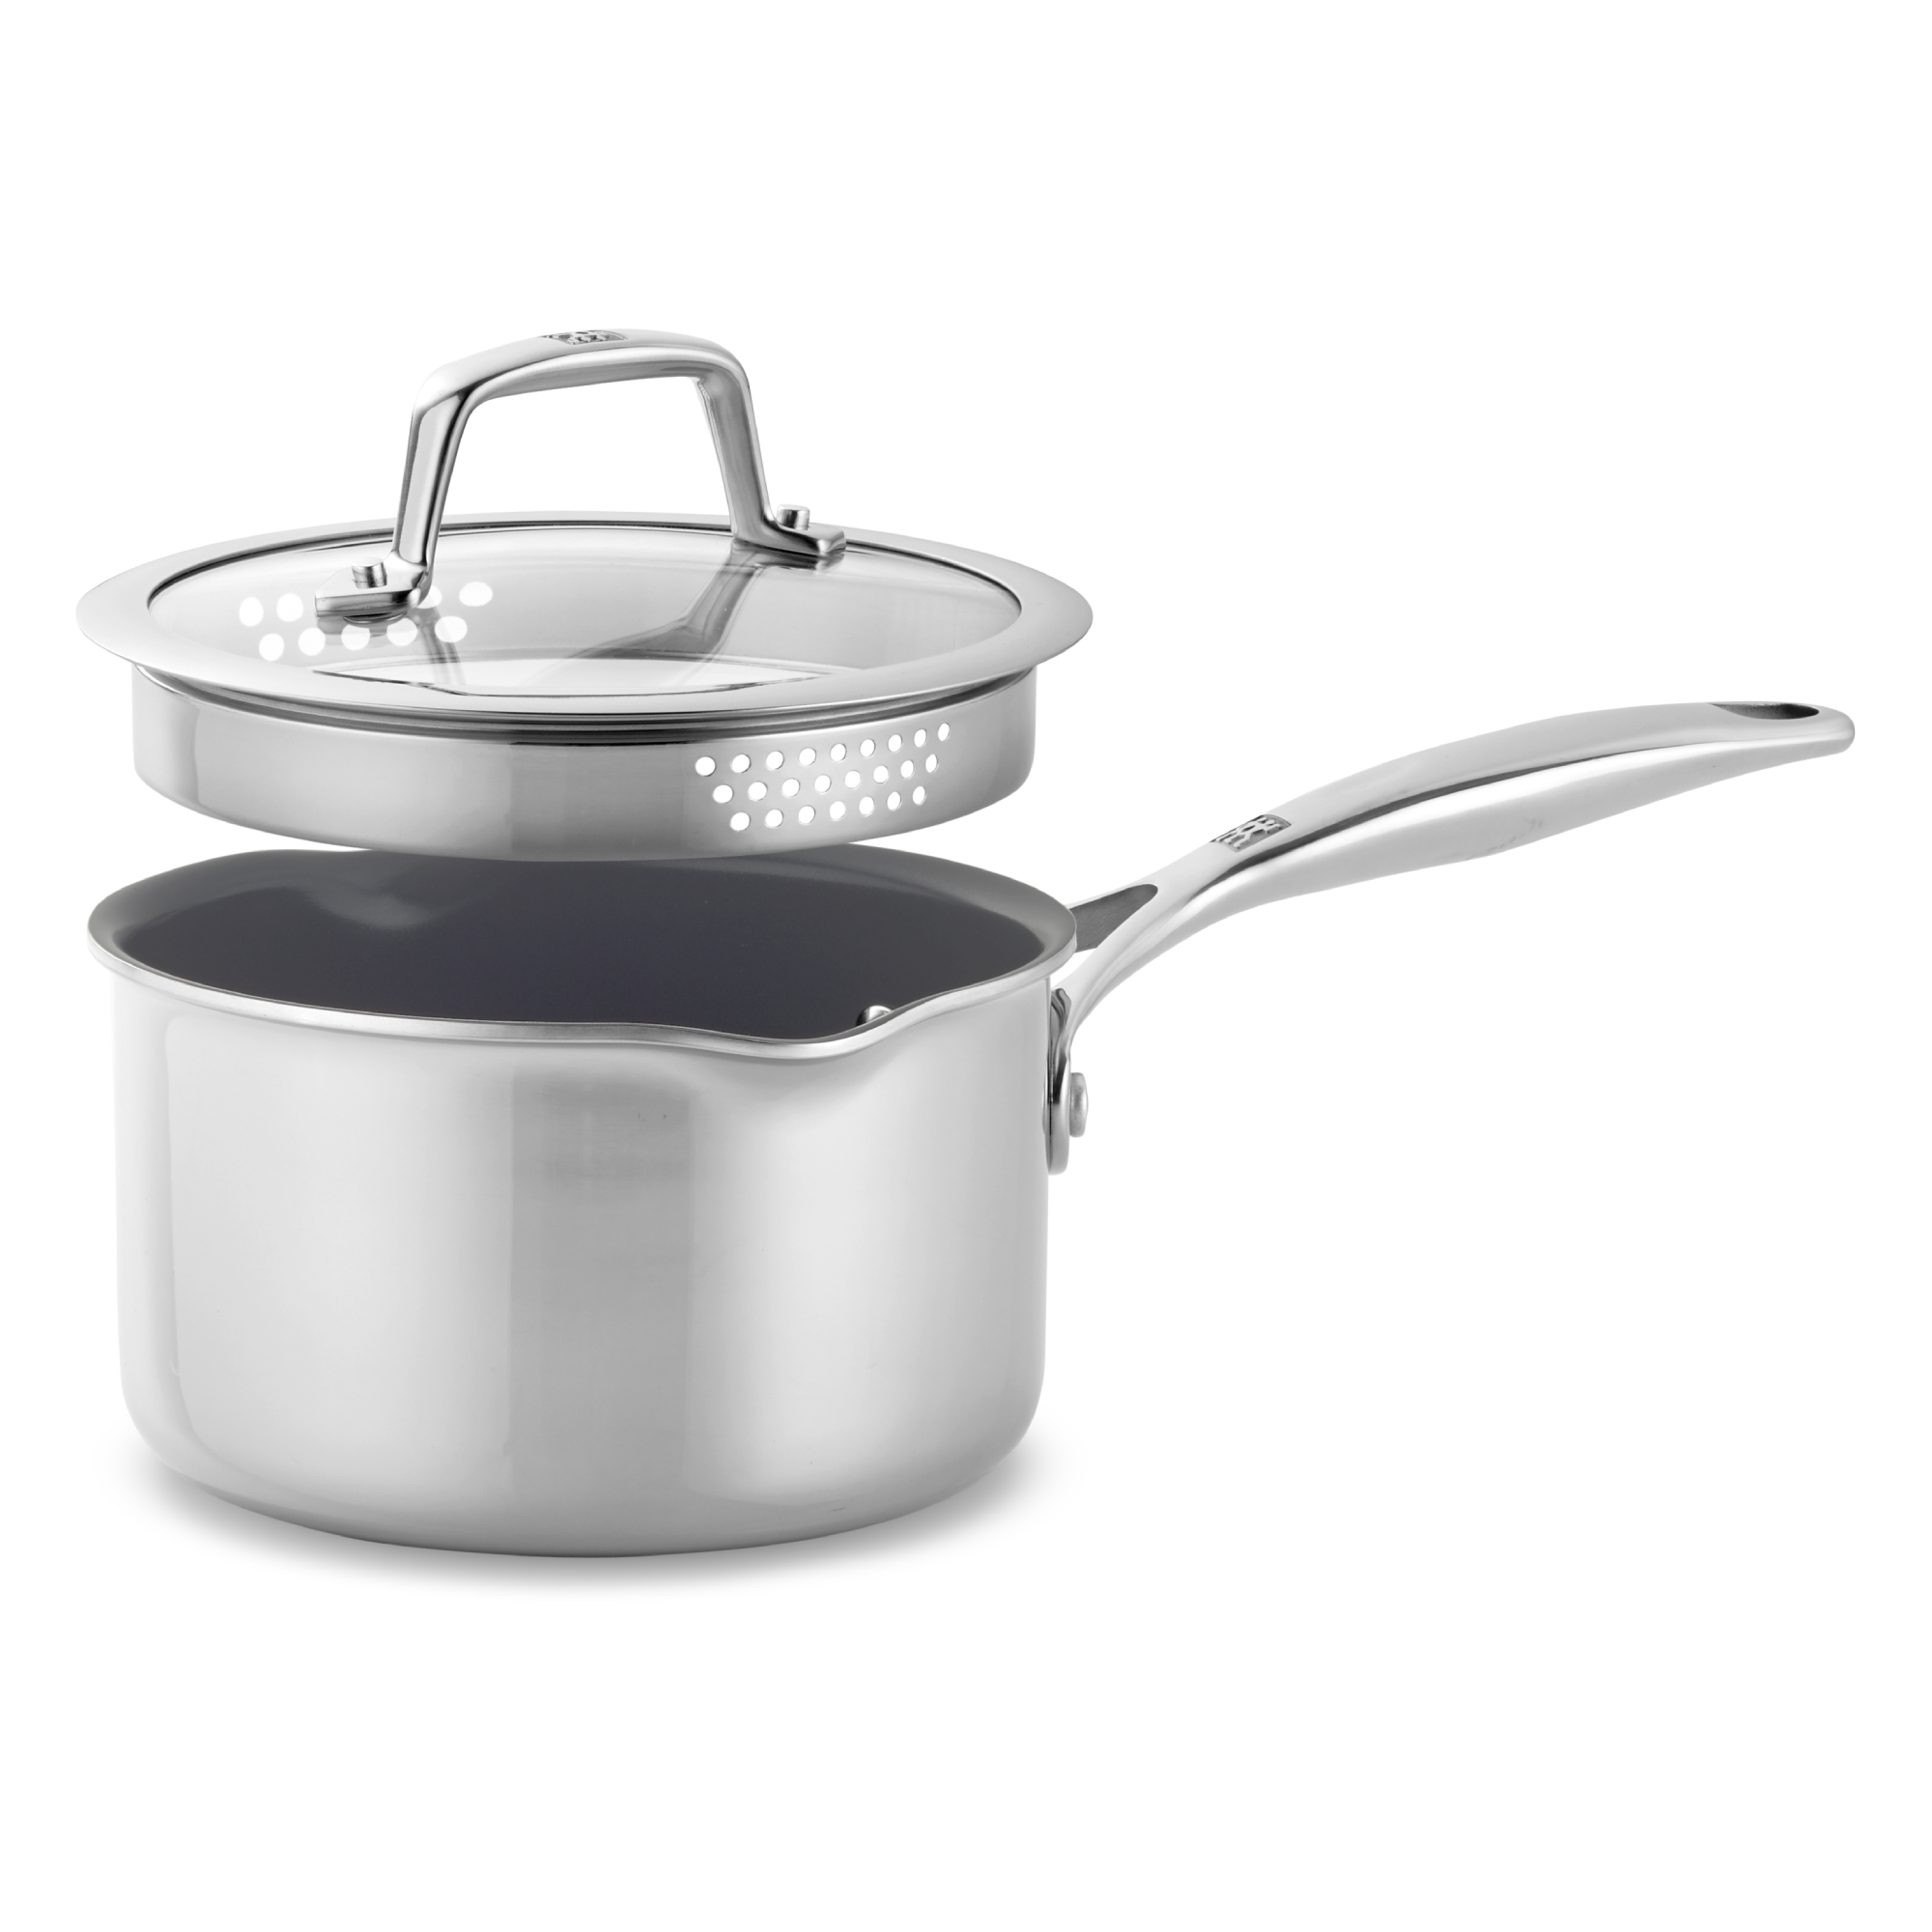 Zwilling Energy Plus 2-pc, 18/10 Stainless Steel, Non-Stick, Frying Pan Set